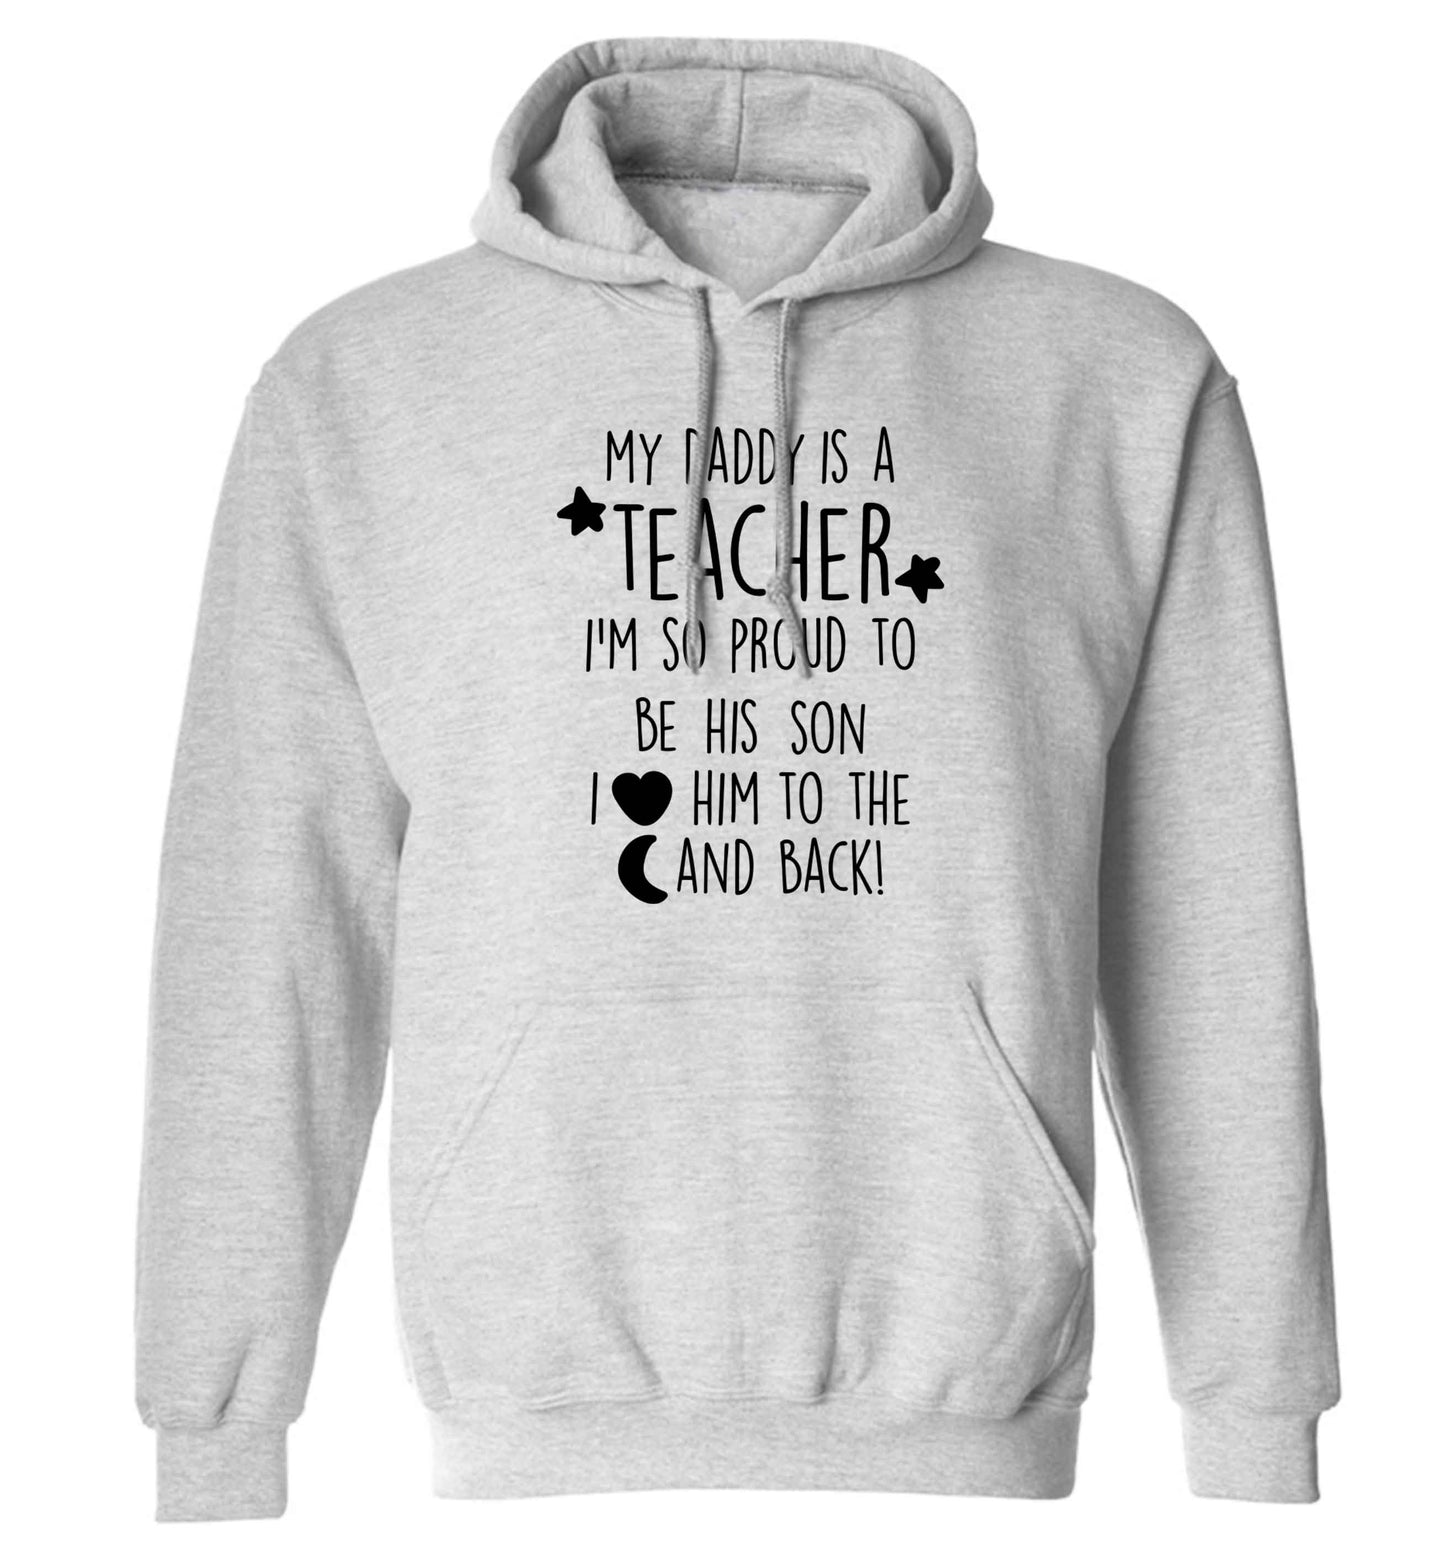 My daddy is a teacher I'm so proud to be his son I love her to the moon and back adults unisex grey hoodie 2XL